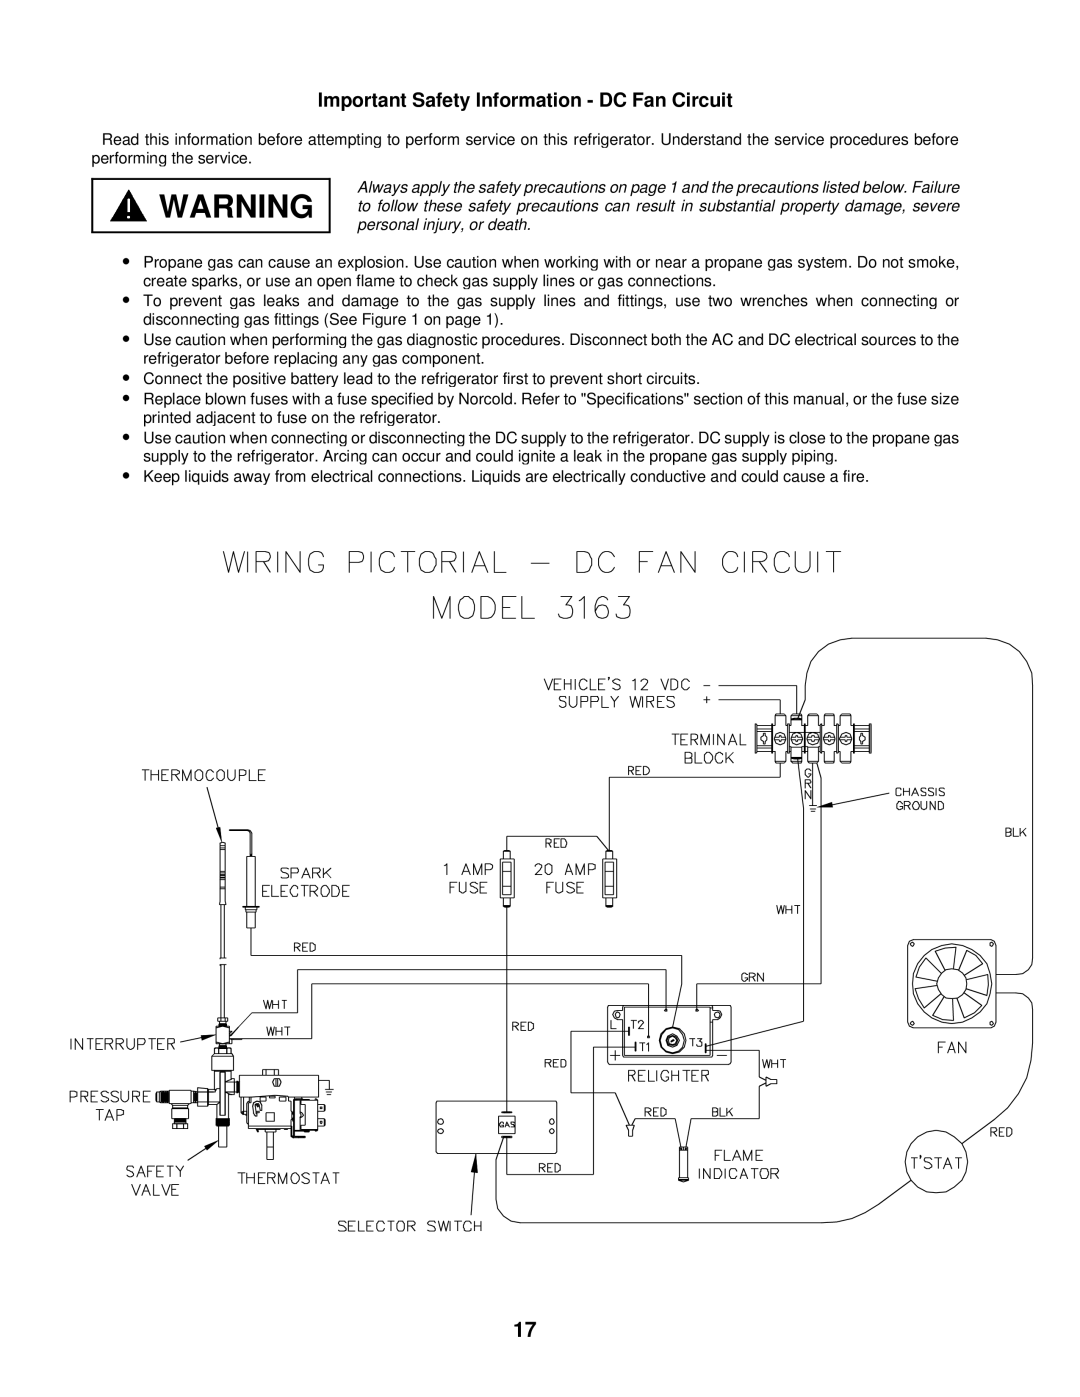 Bryant 3163 service manual Important Safety Information - DC Fan Circuit 